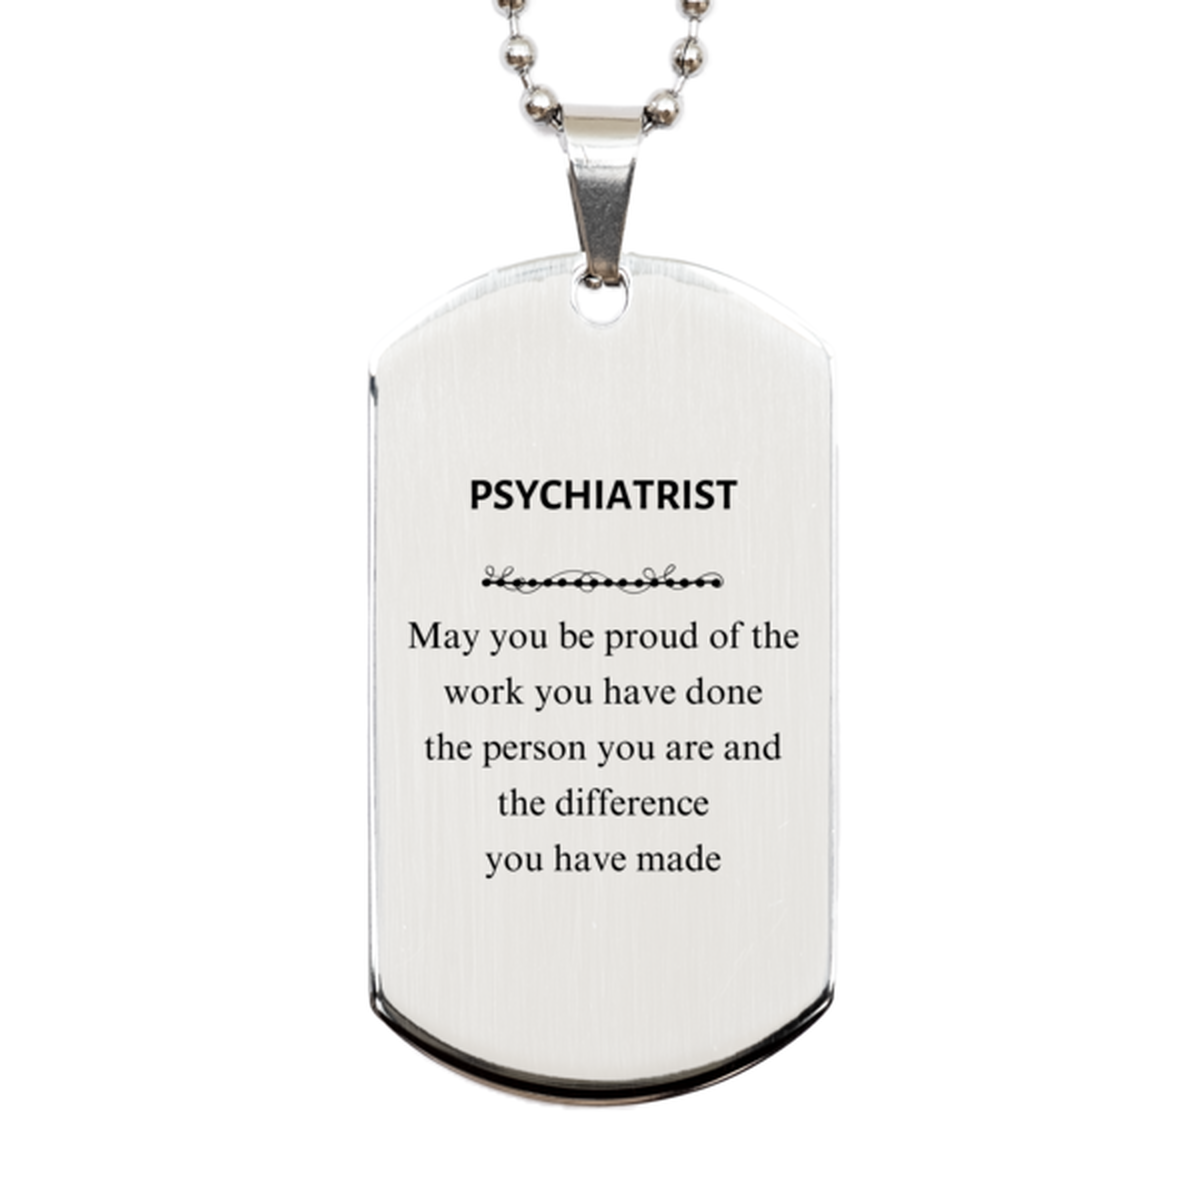 Psychiatrist May you be proud of the work you have done, Retirement Psychiatrist Silver Dog Tag for Colleague Appreciation Gifts Amazing for Psychiatrist